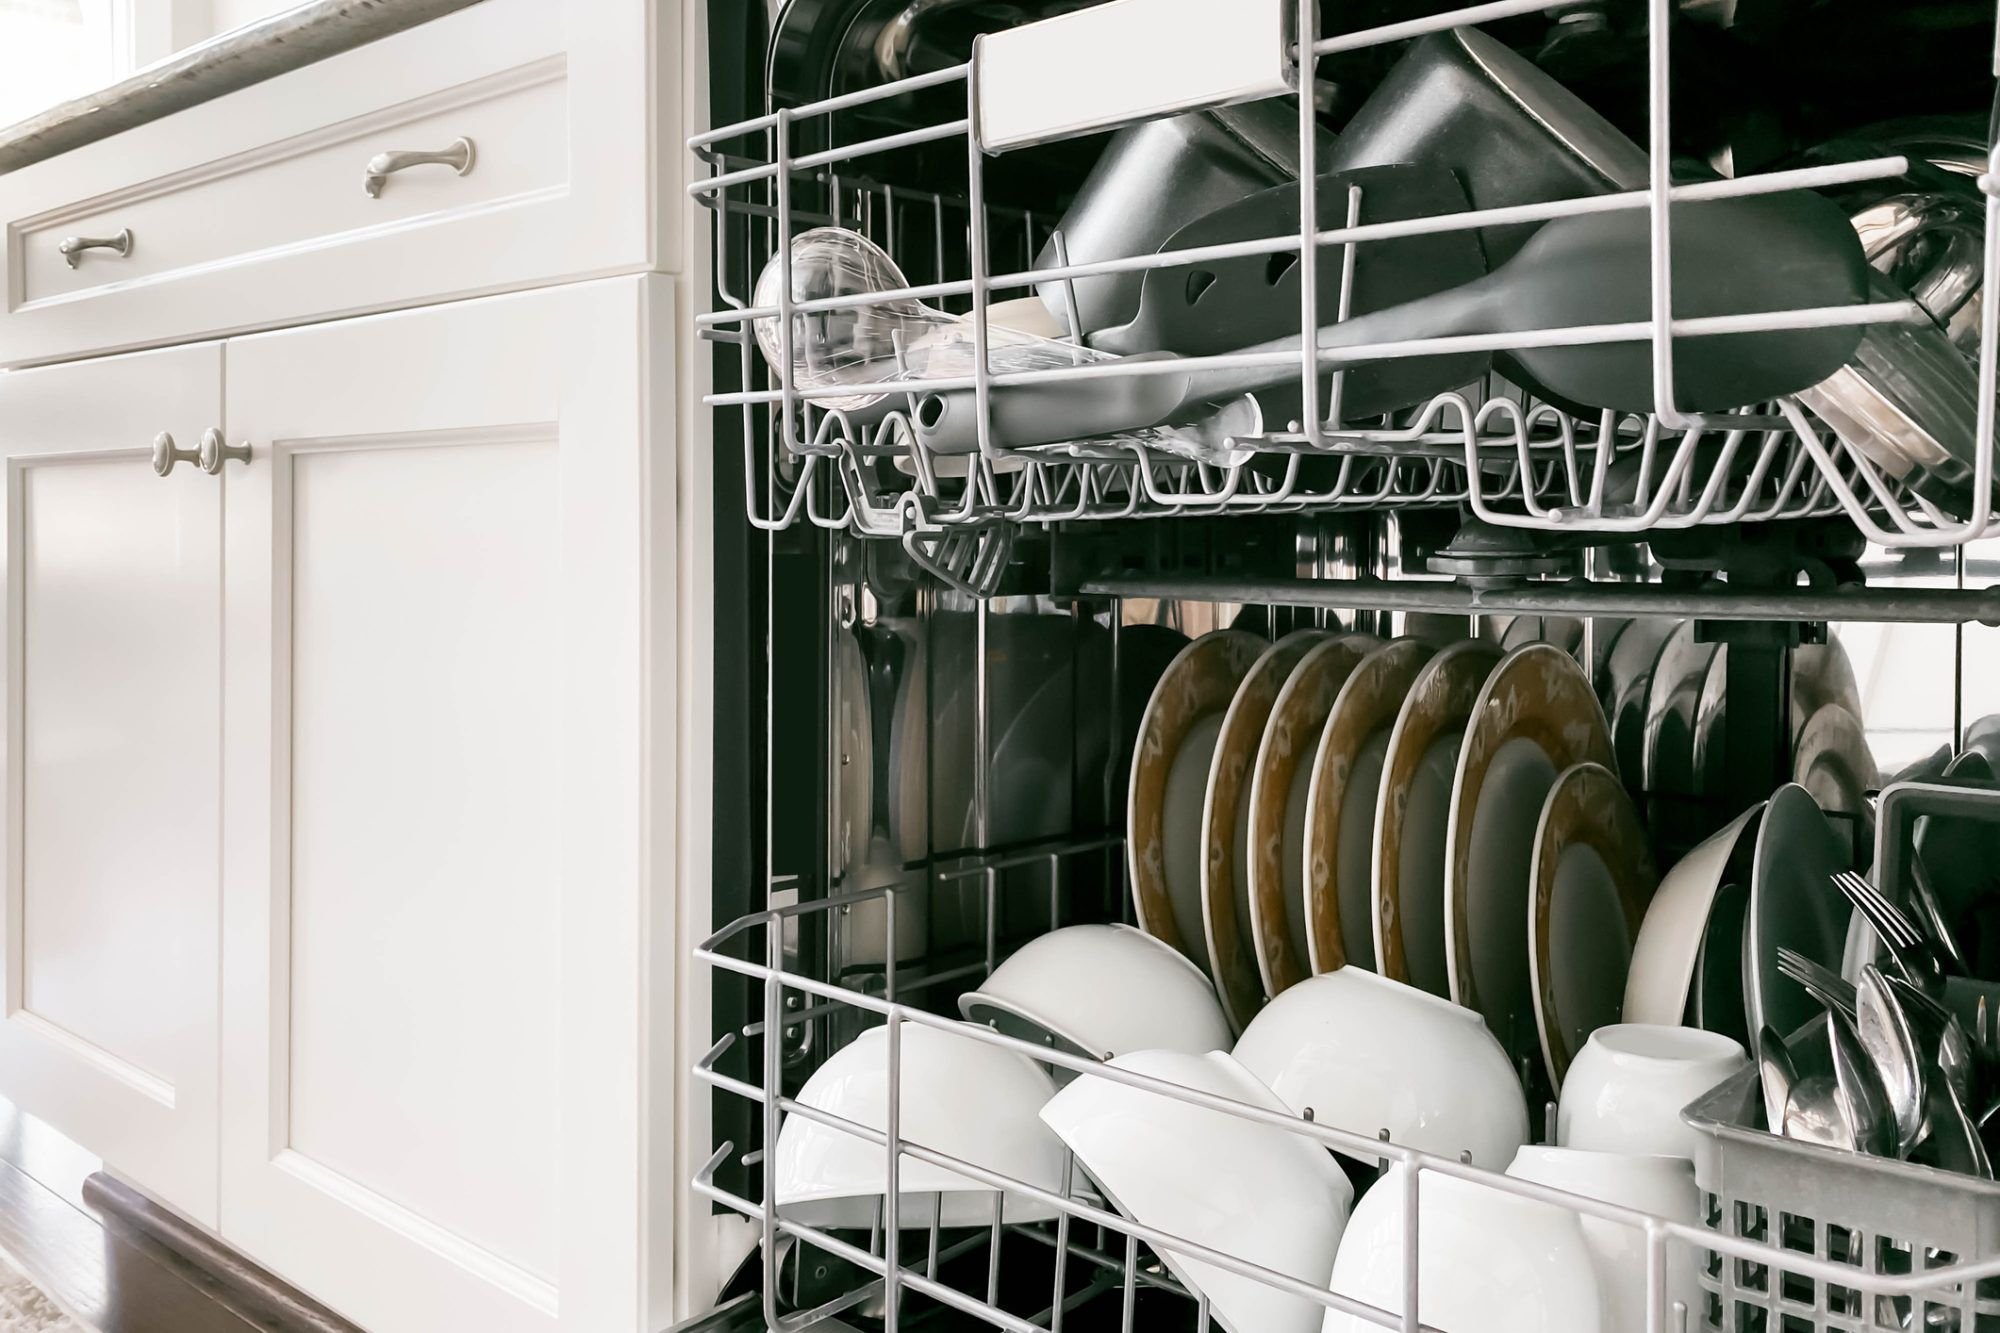 Why You Need to Clean Your Dishwasher Filter